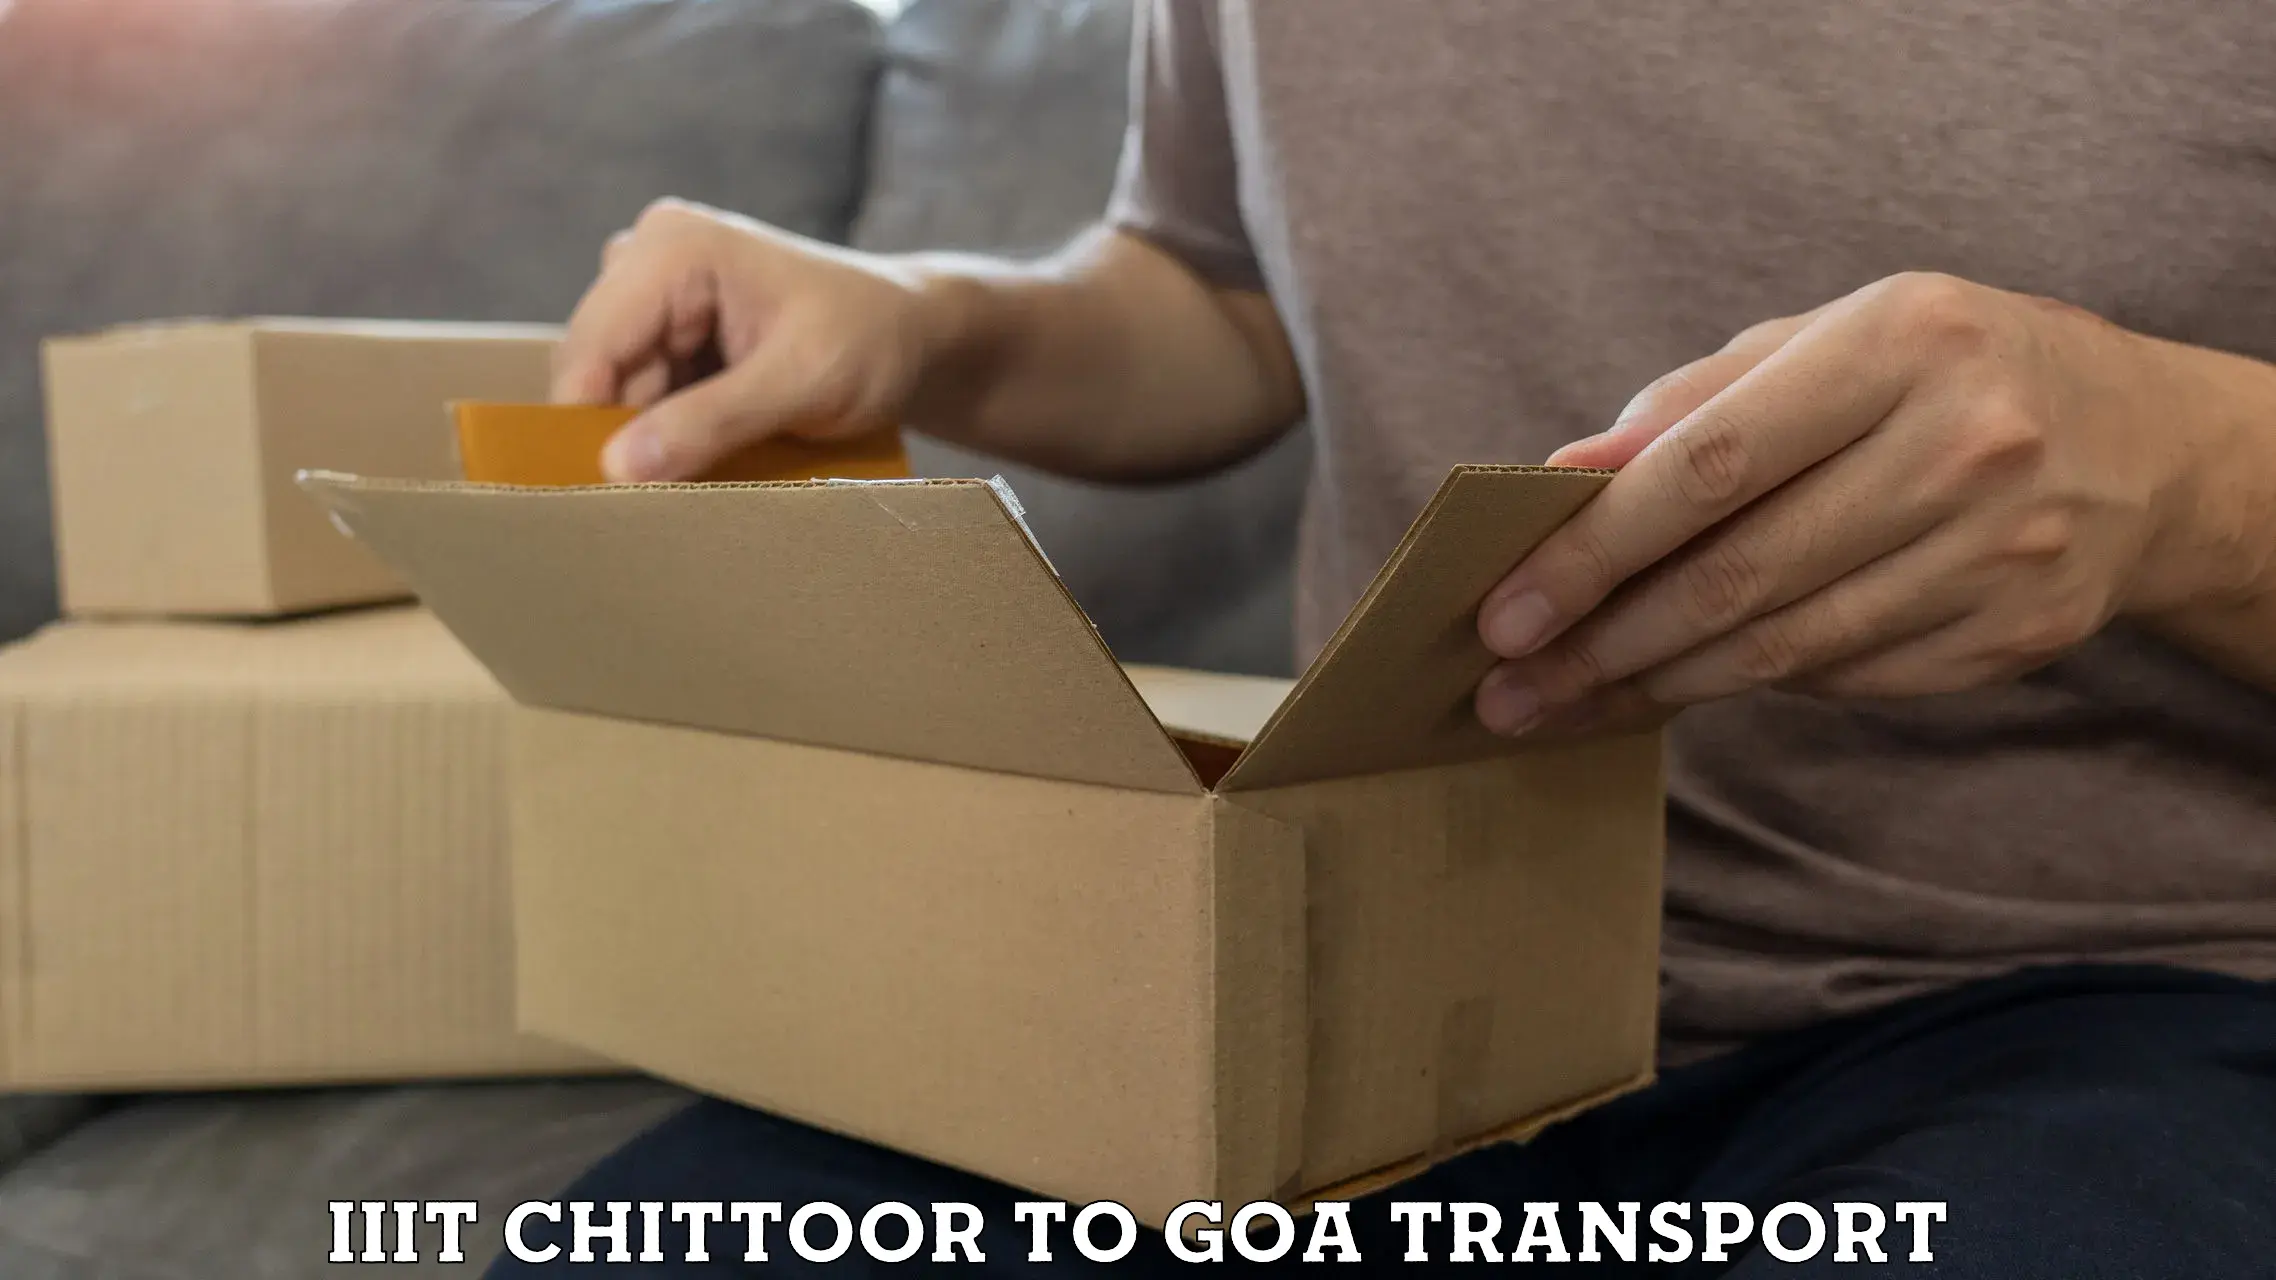 Furniture transport service IIIT Chittoor to South Goa